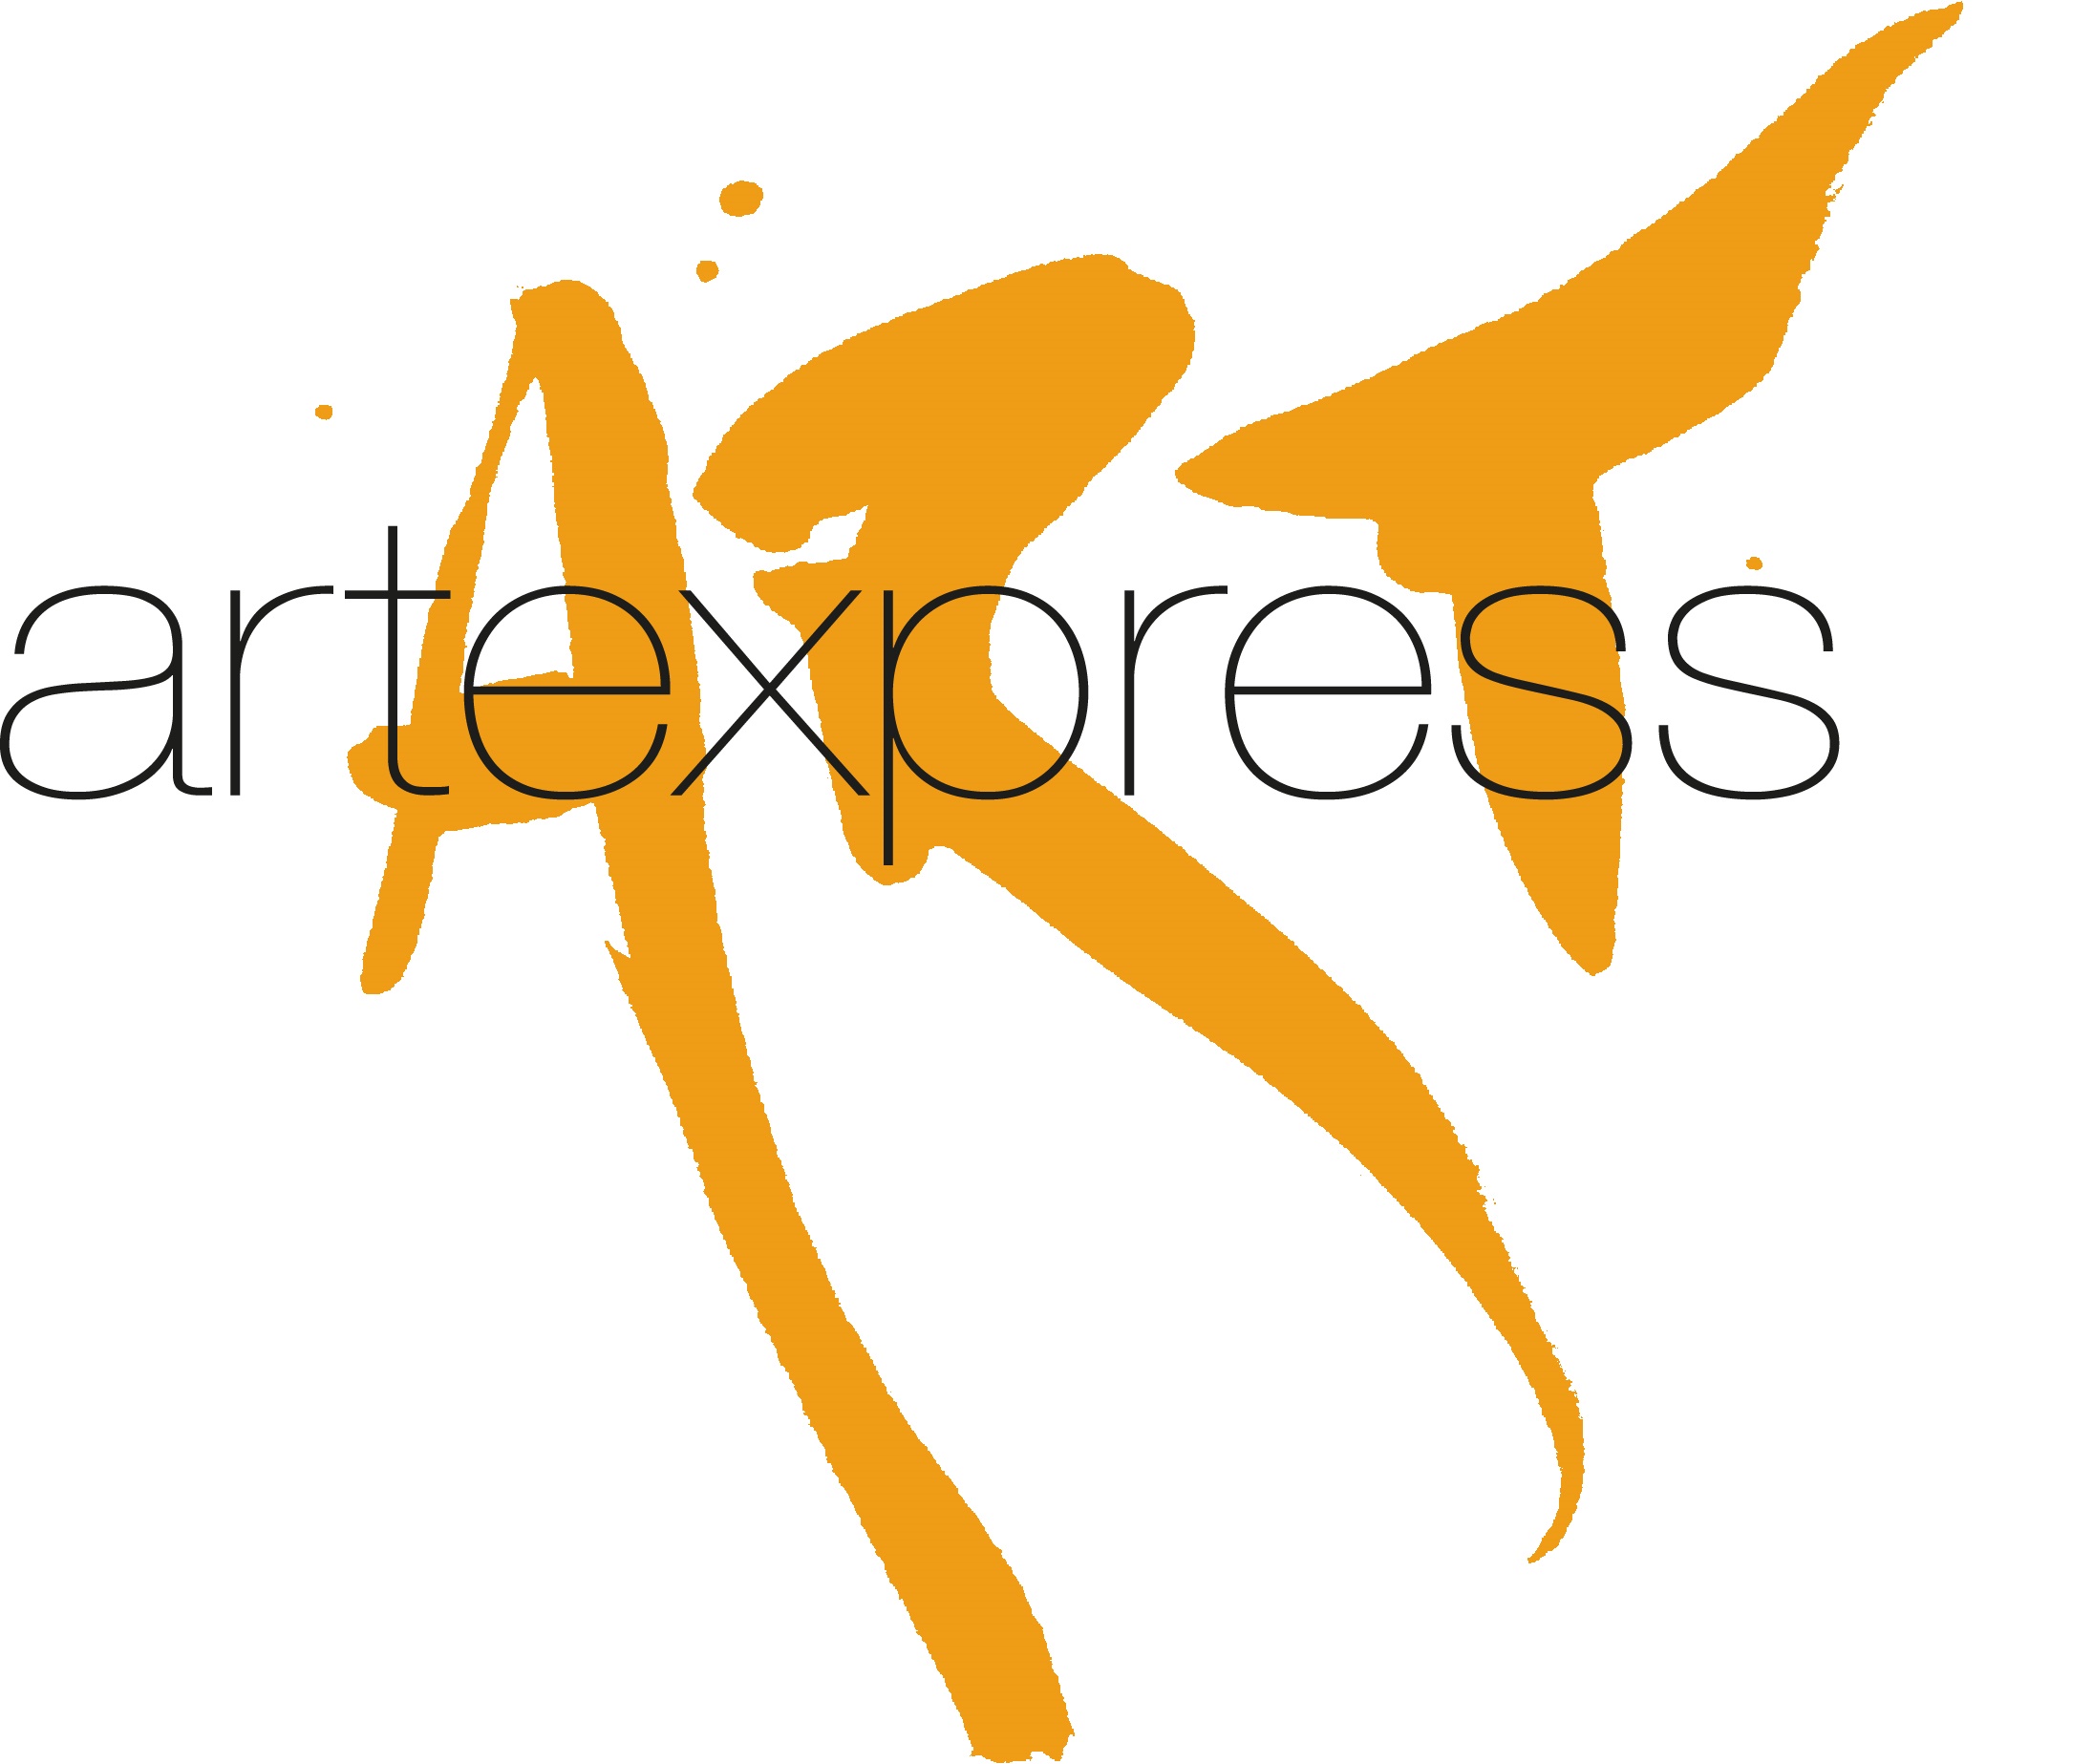 An artistic orange brushstroke design forms abstract shapes on a white background. Overlaid on the design is the word "artexpress" in a sleek, modern black font. The orange brush strokes appear dynamic and free-flowing, with splatters and tapered ends.